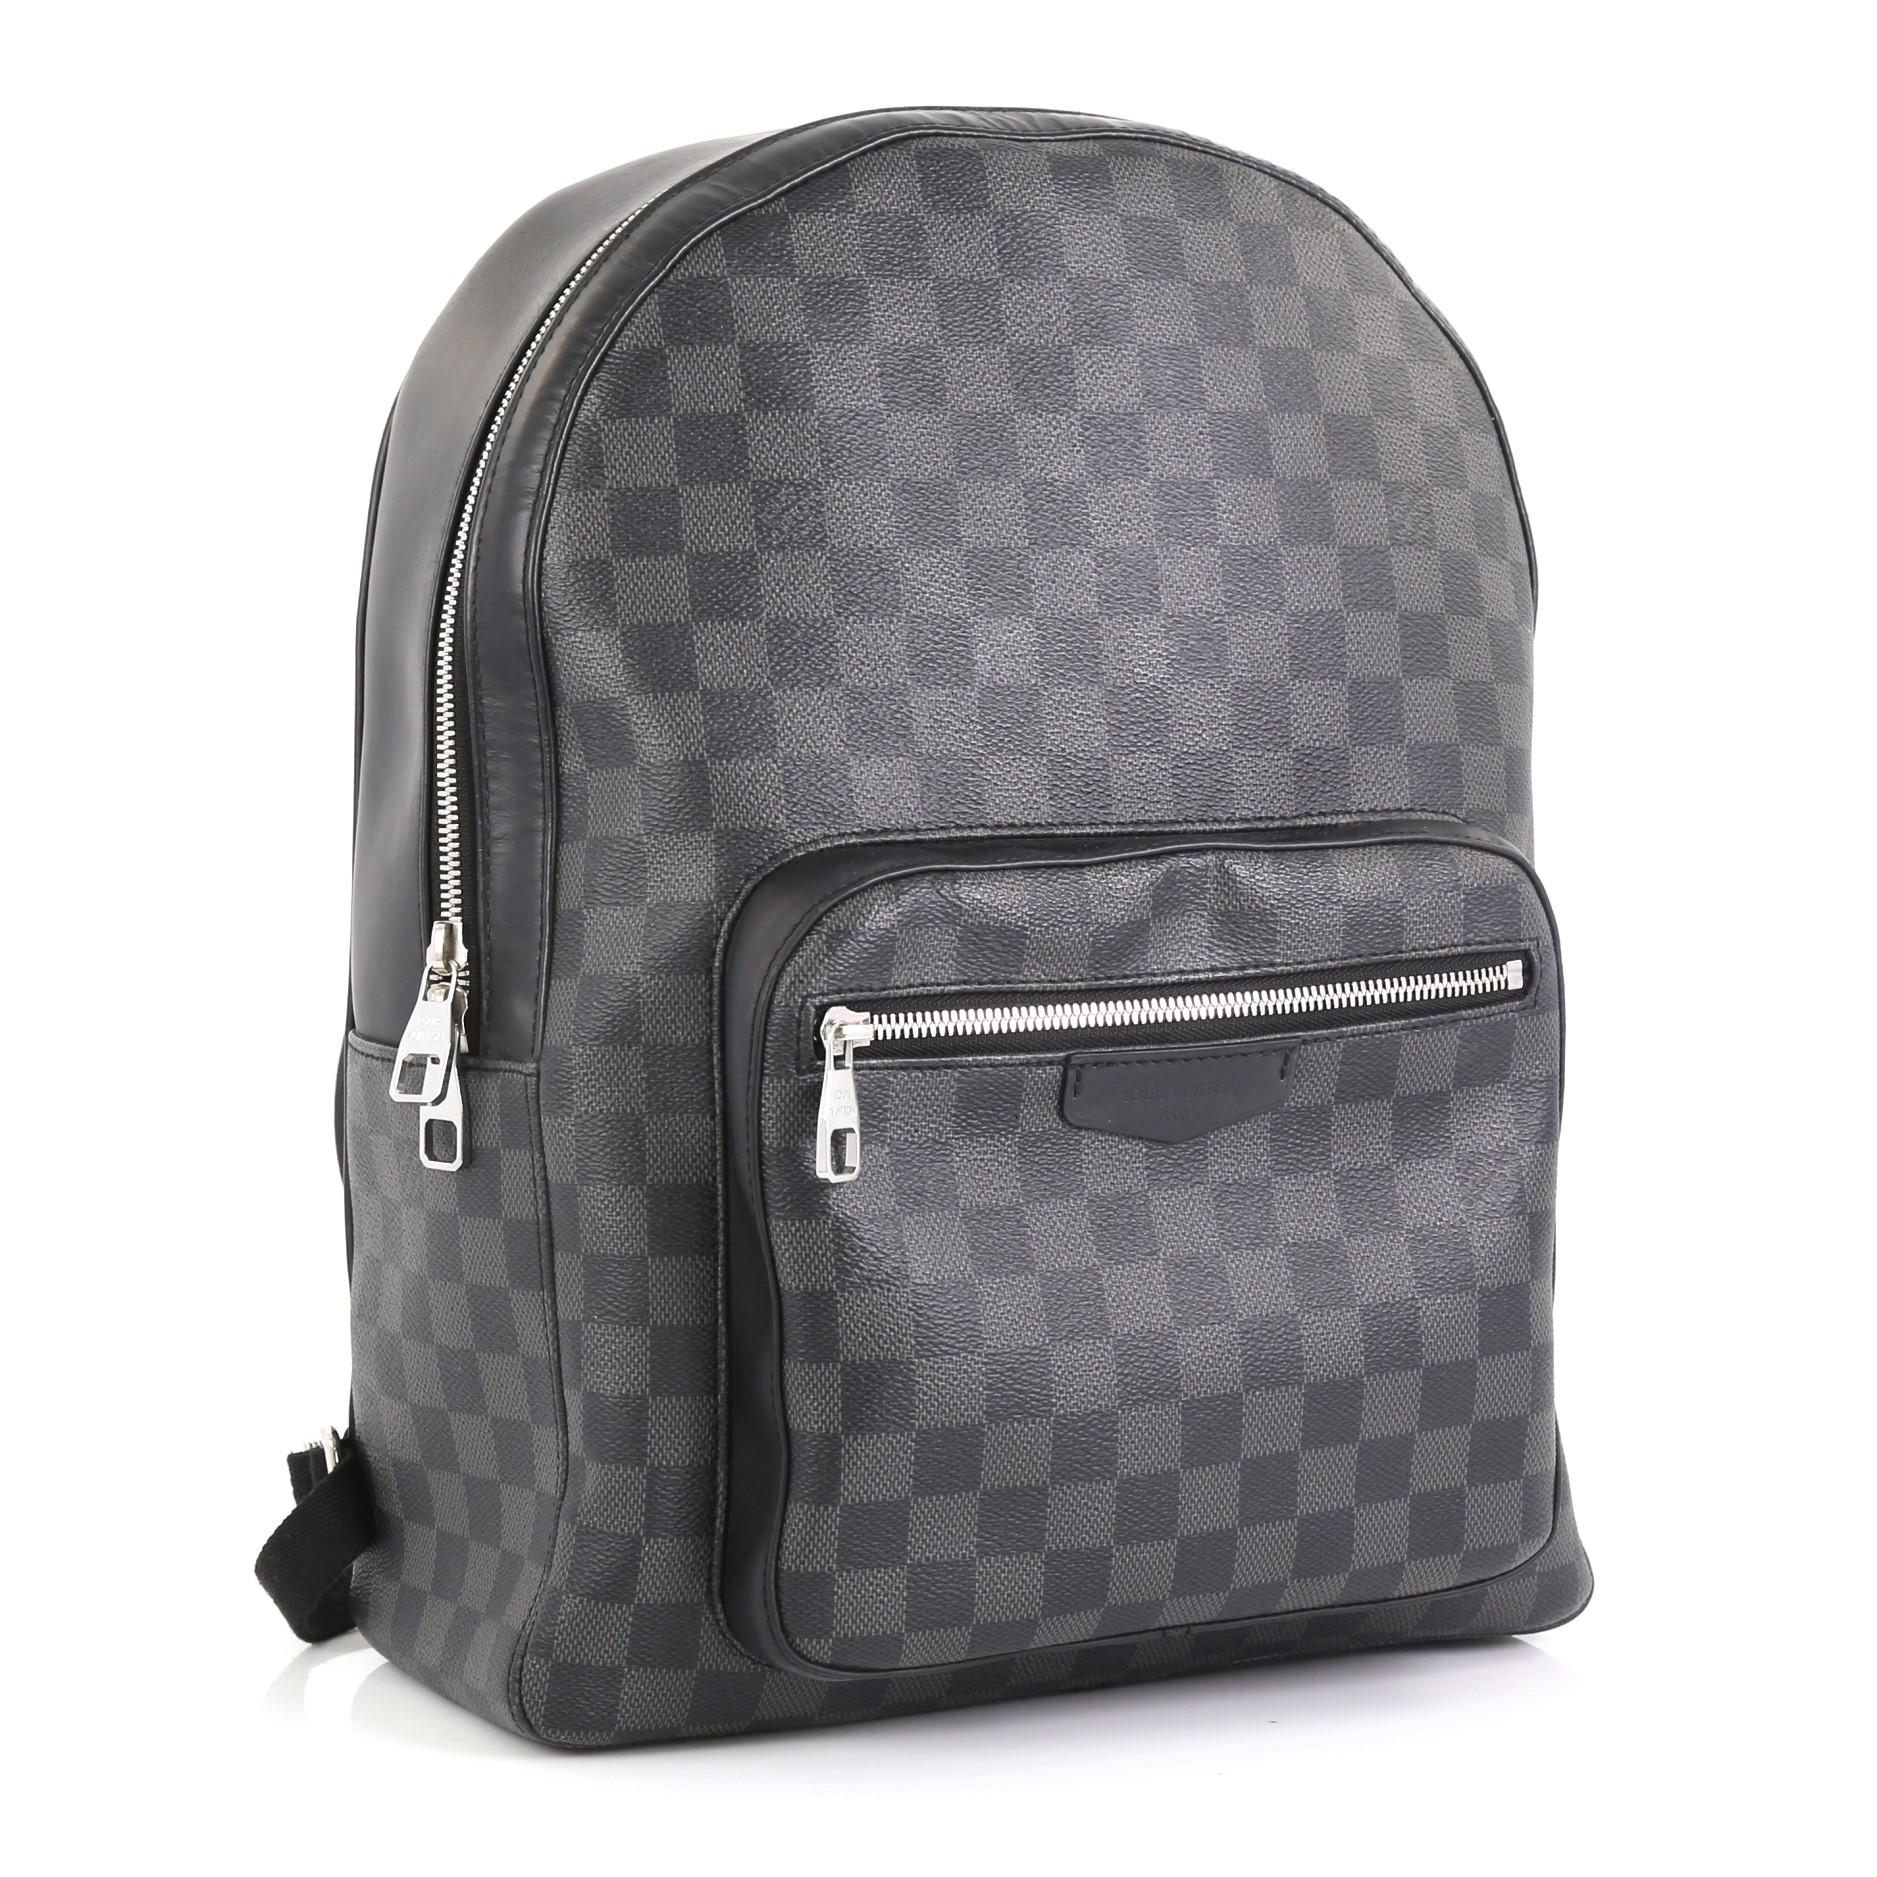 This Louis Vuitton Josh Backpack Damier Graphite, crafted in damier graphite, features adjustable backpack straps, exterior front zip pocket and silver-tone hardware. Its zip closure opens to a black fabric interior. Authenticity code reads: SD1117.